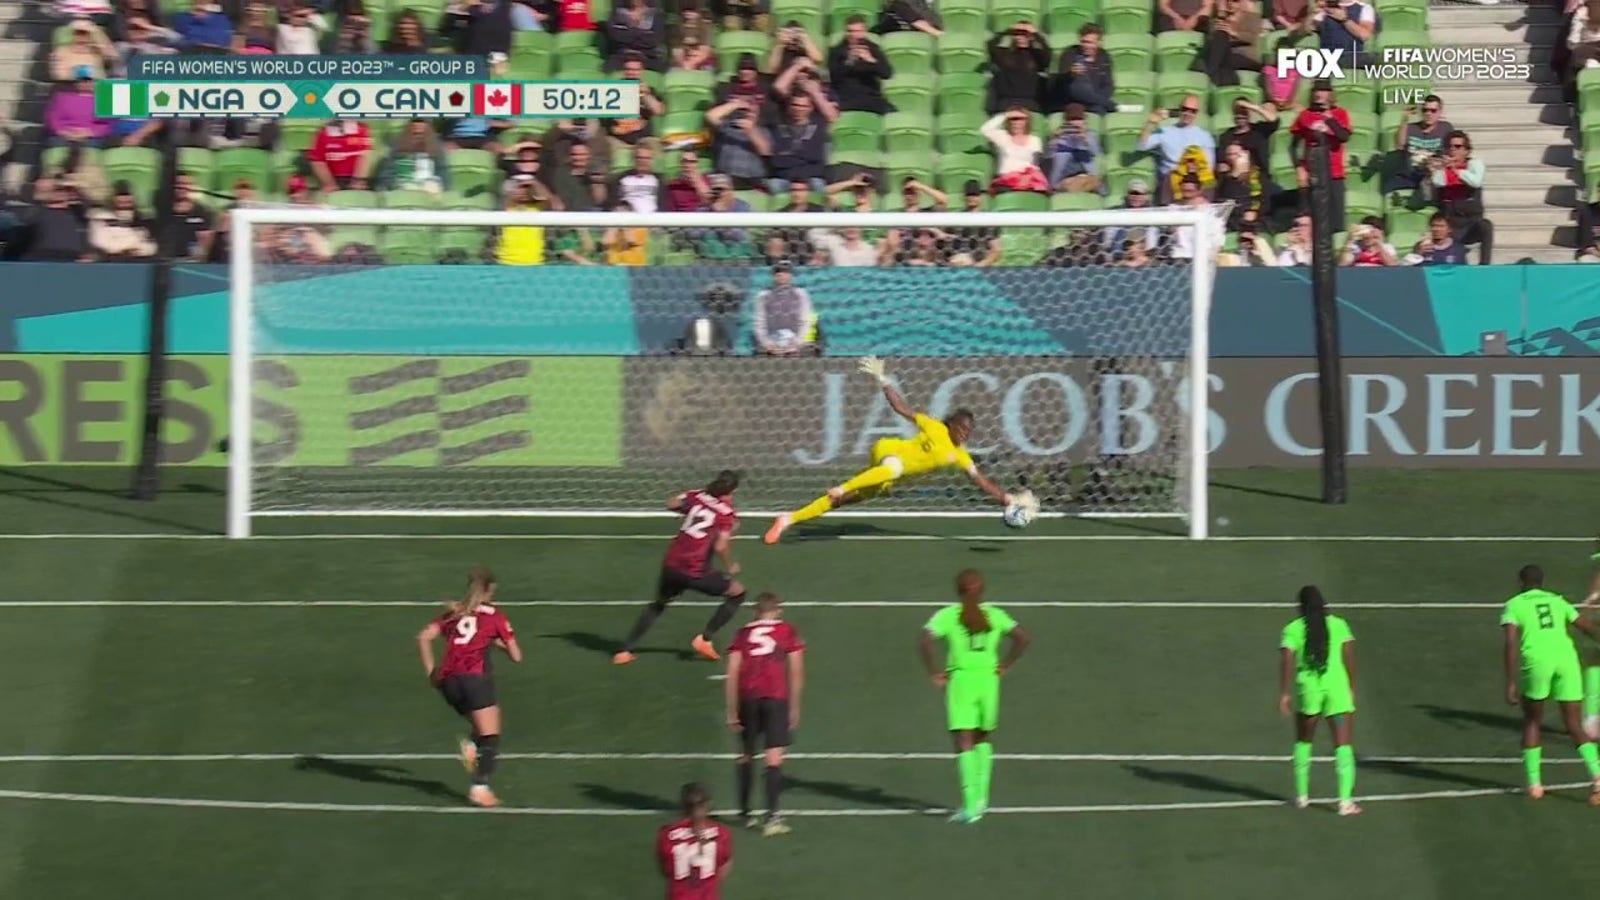 Nigeria's Chiamaka Nnadozie makes a STUNNING SAVE on a PK from Canada to keep the game scoreless